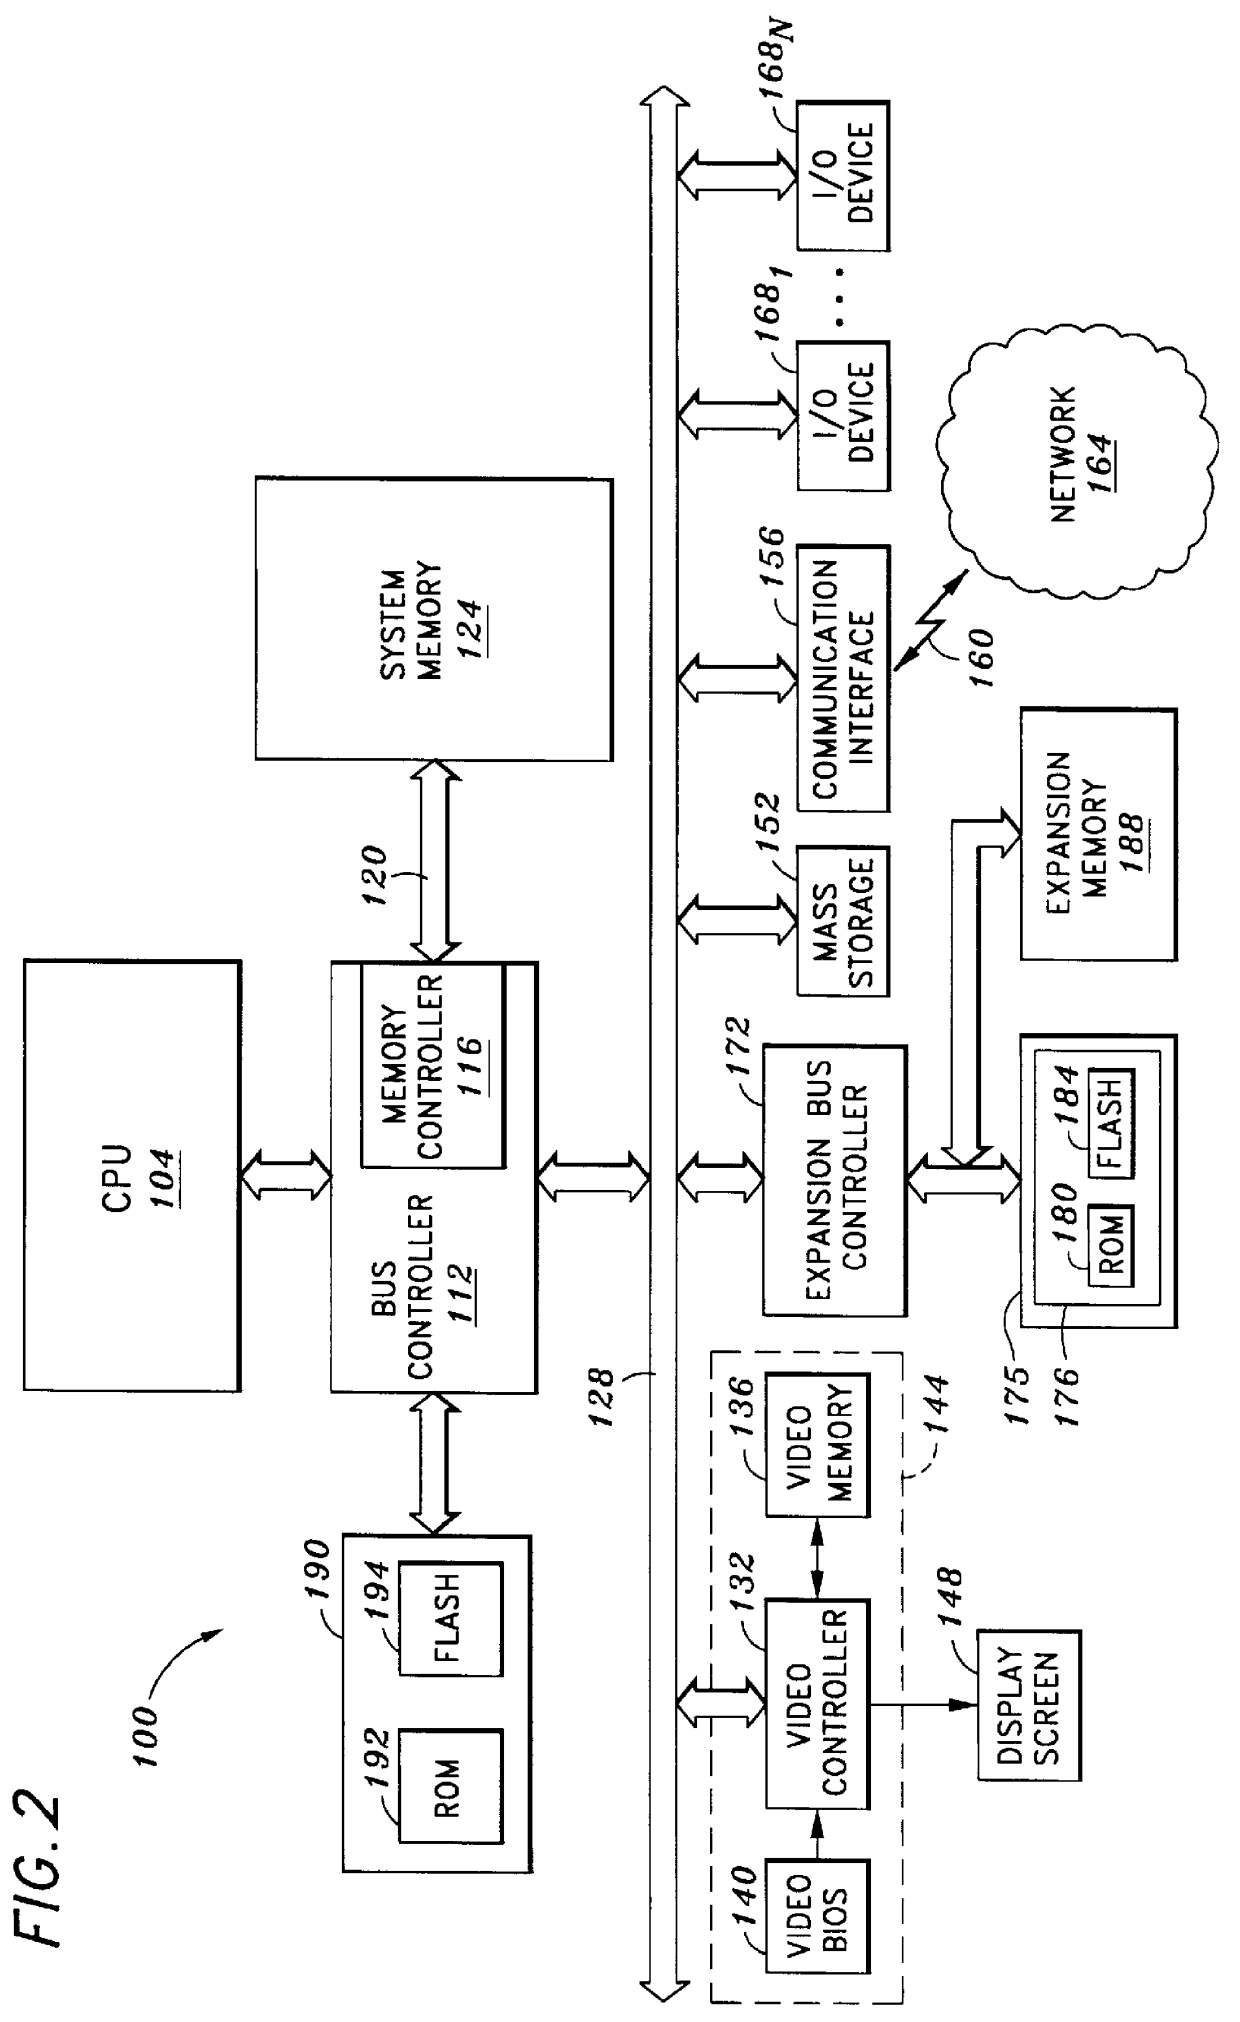 System and method for securely utilizing basic input and output system (BIOS) services